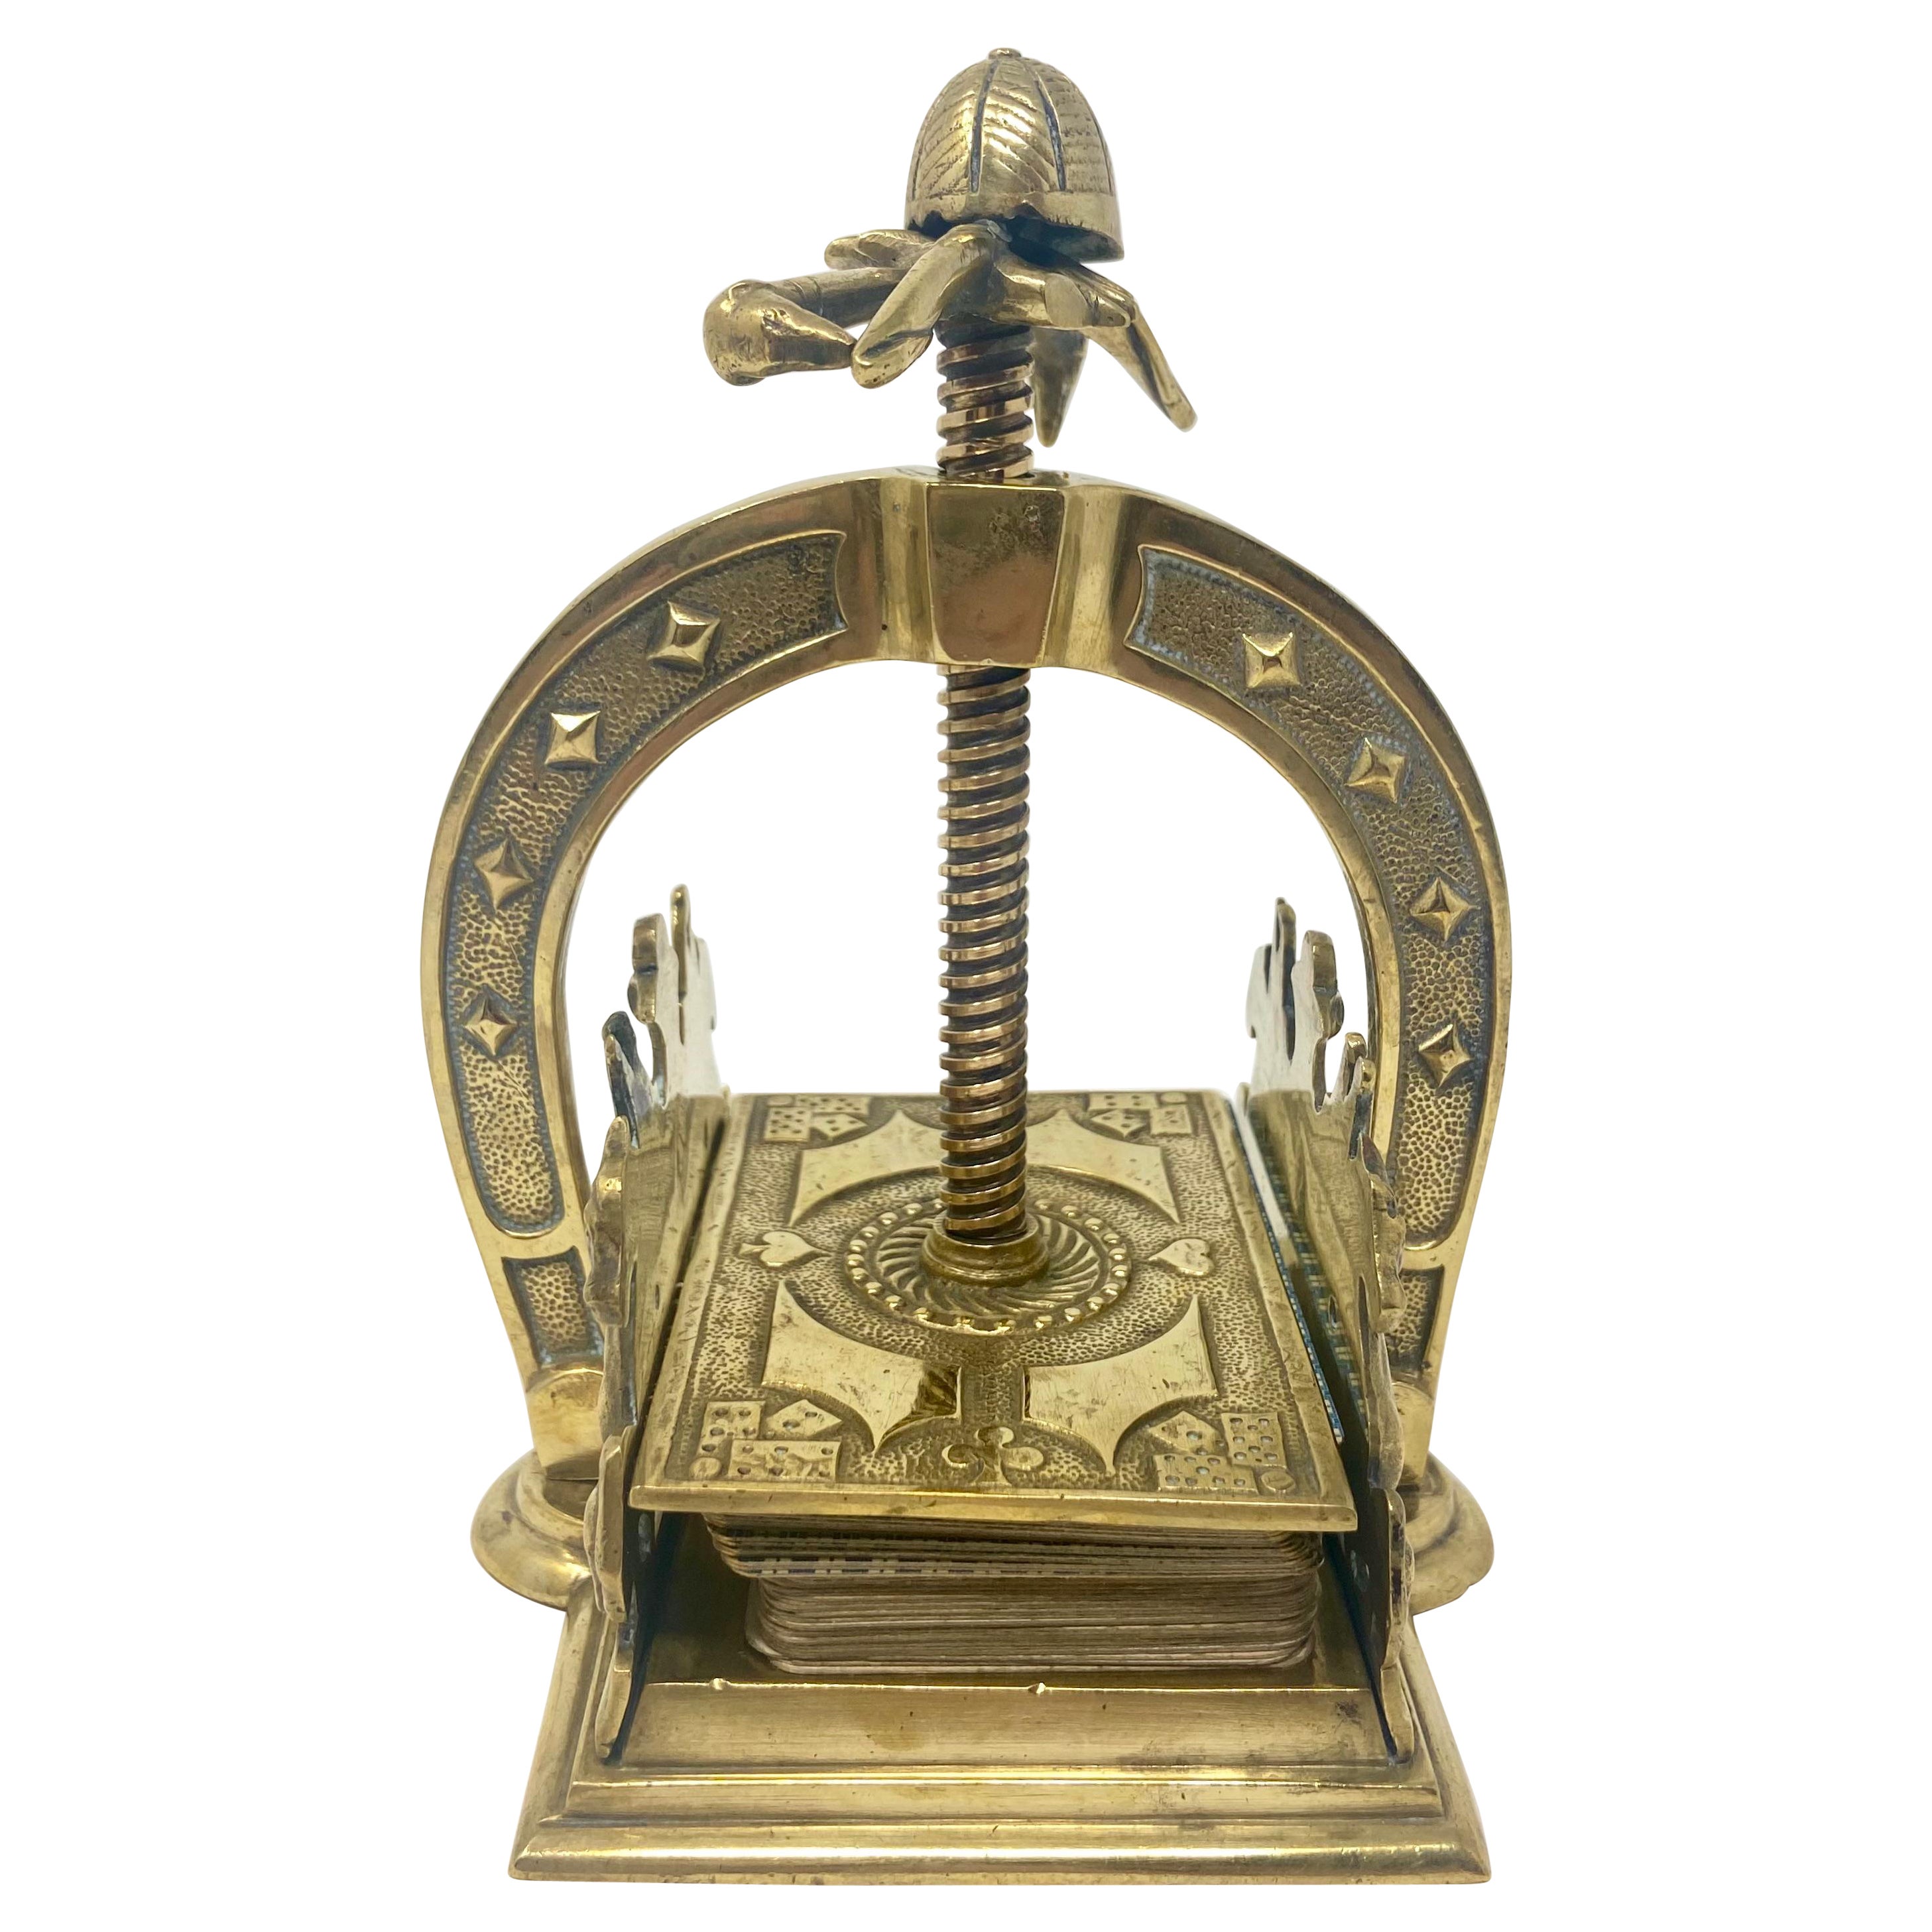 Antique Victorian Brass Playing Card Press in a Horse Racing Theme, Circa 1900.